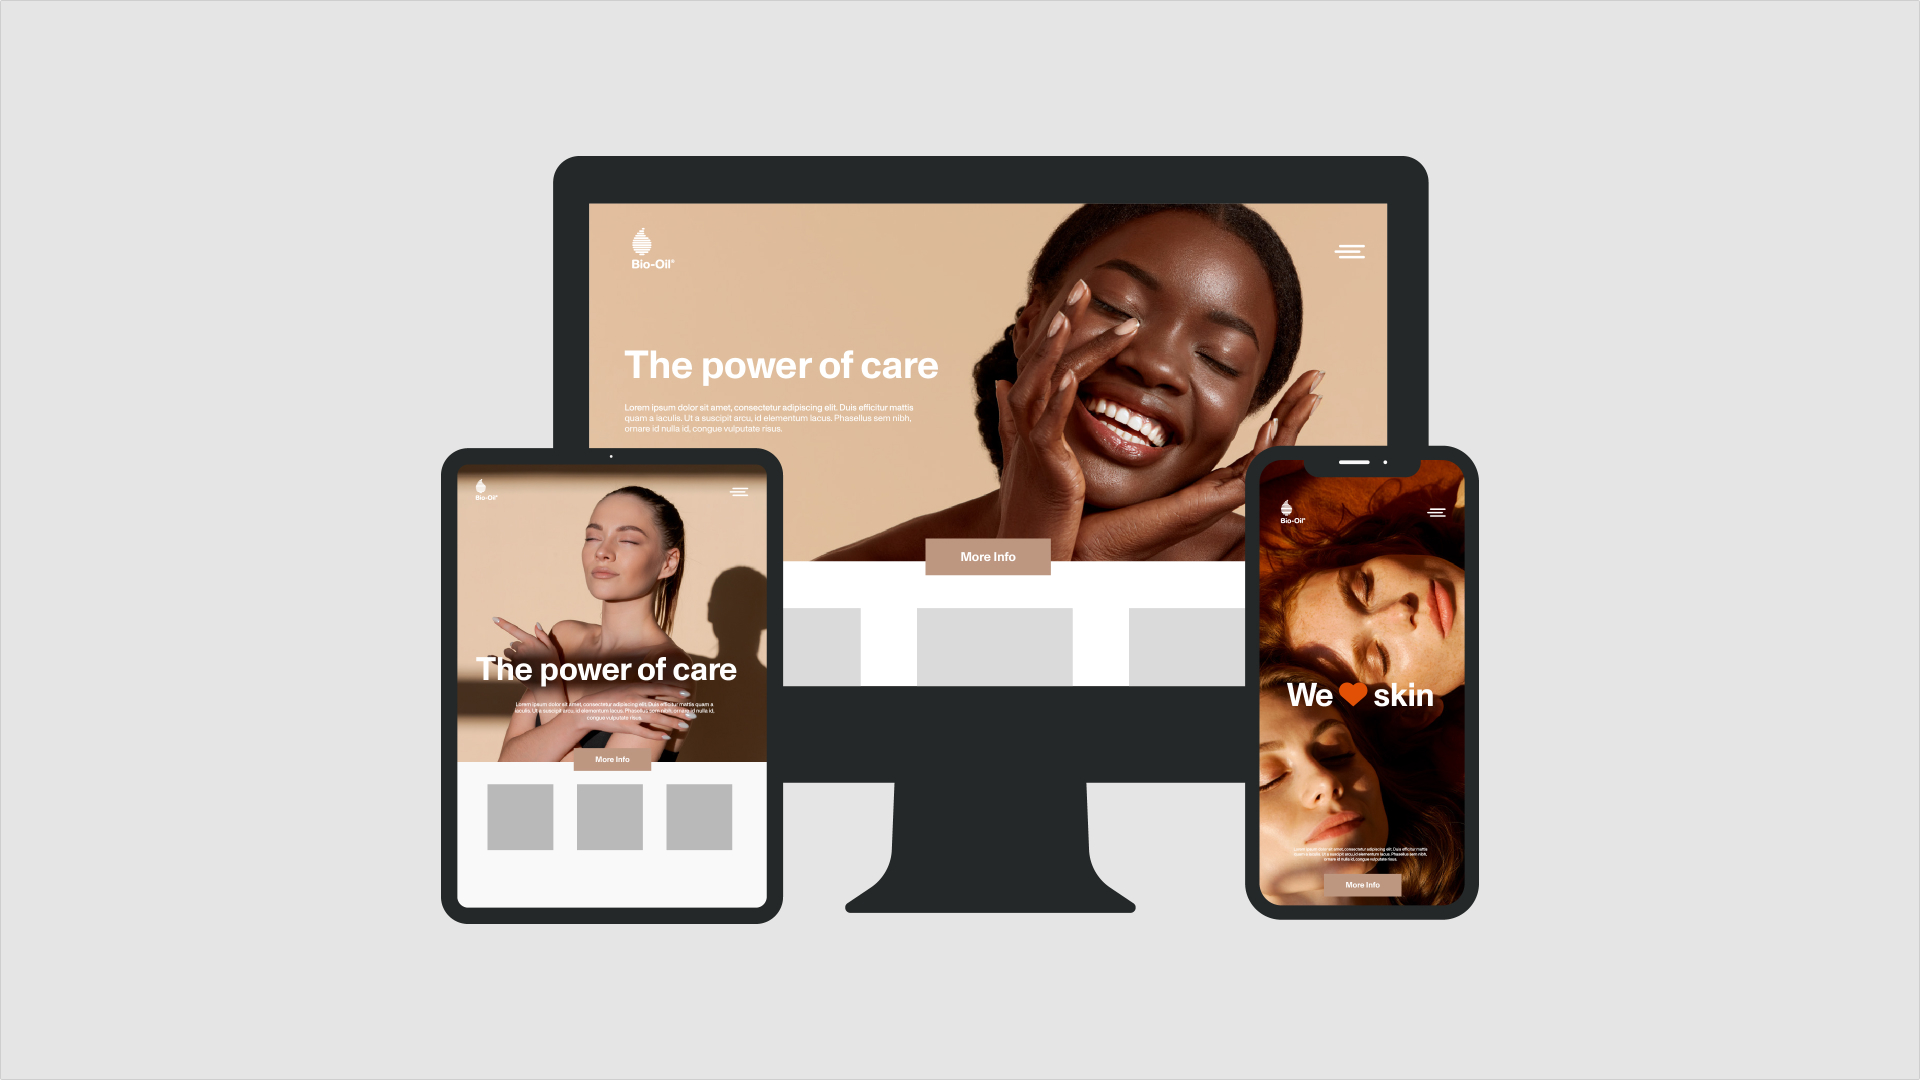 Skin care campaign for social networks